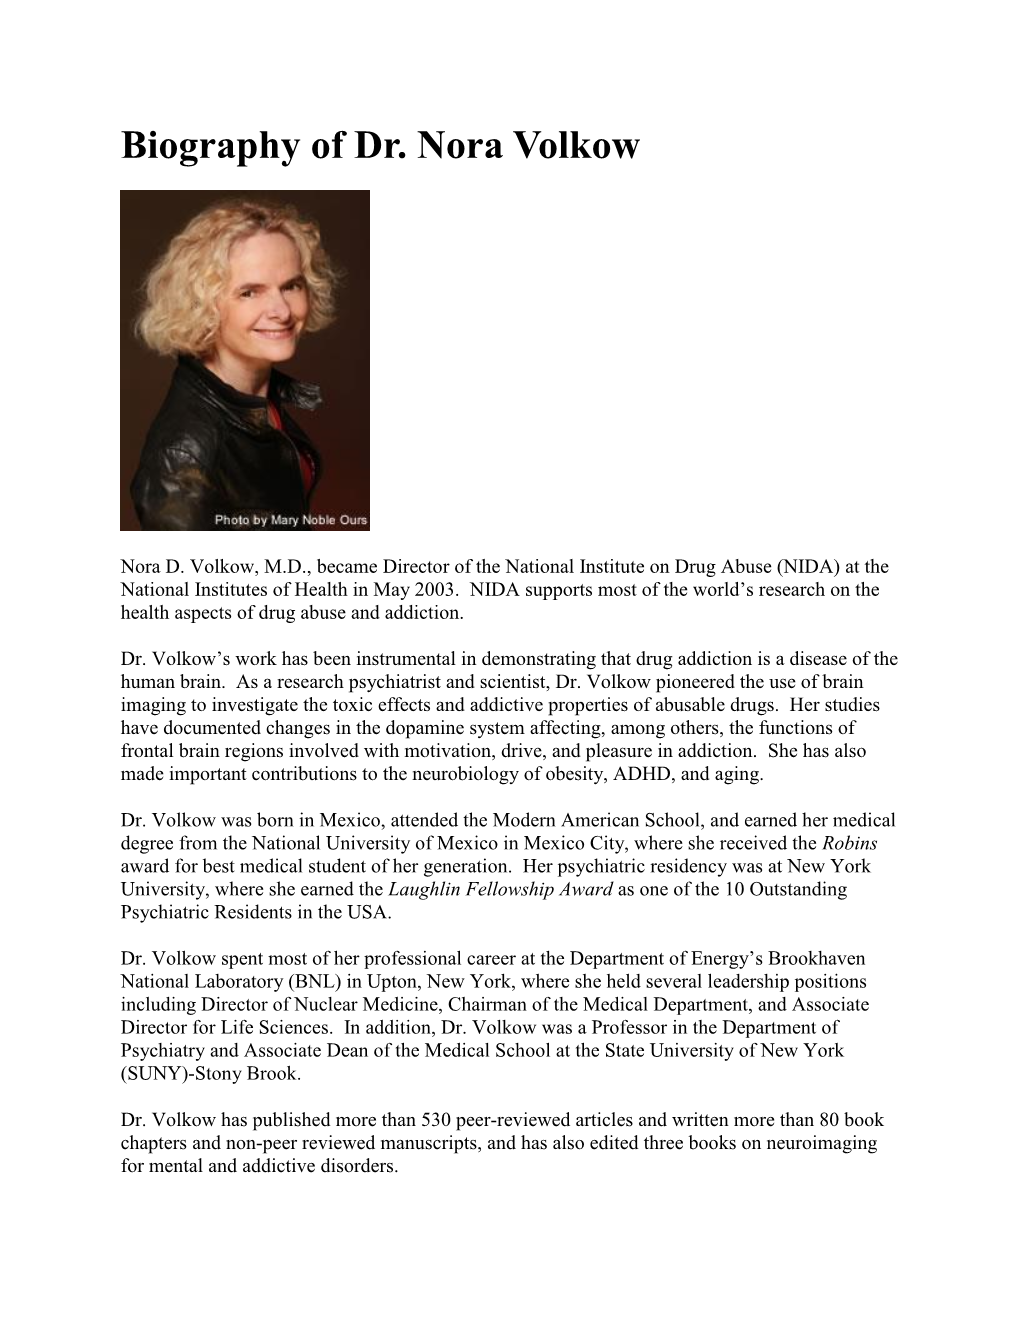 Biography of Dr. Nora Volkow